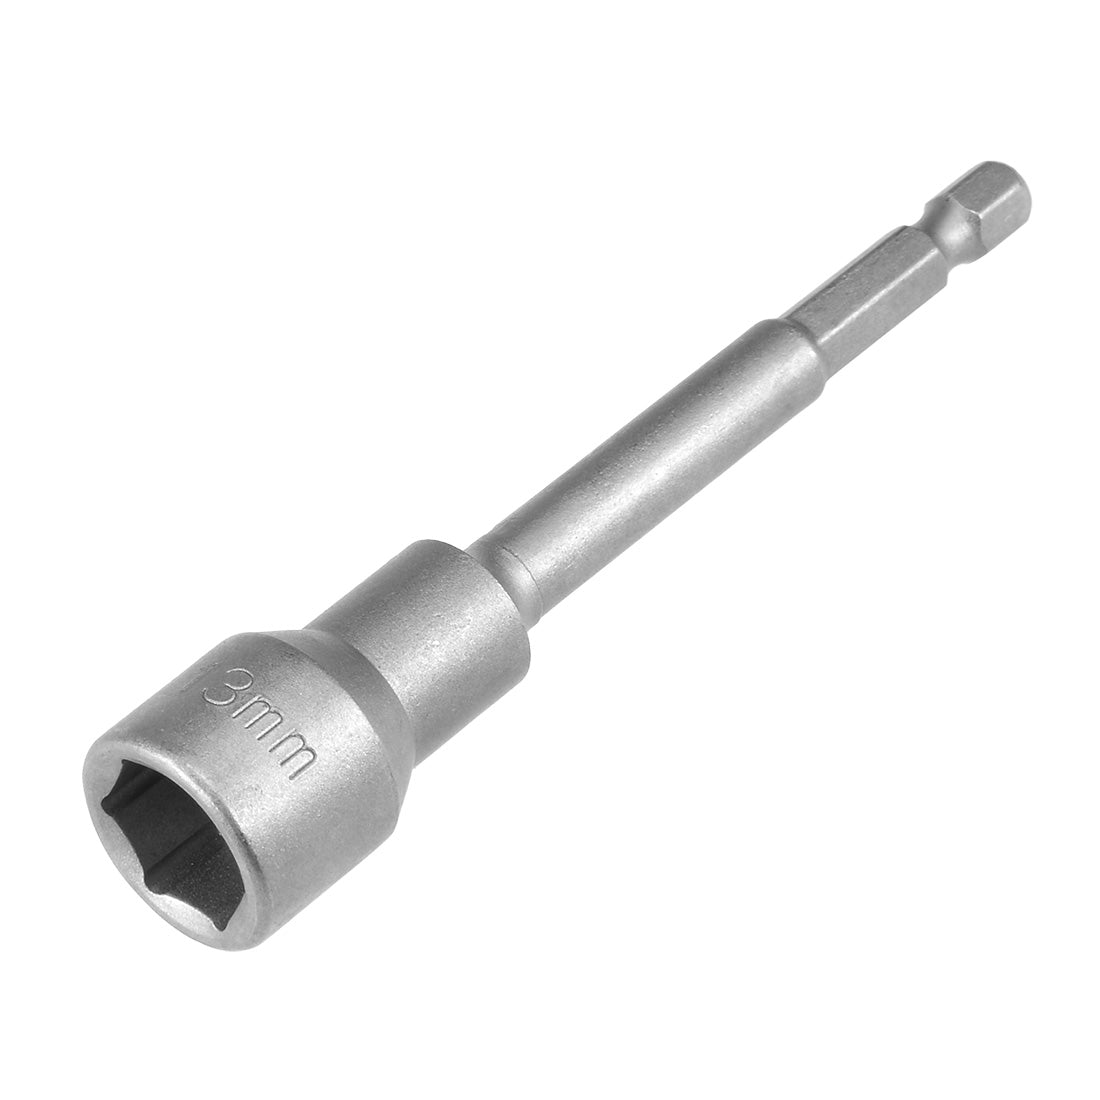 Uxcell Uxcell 1/4" Quick Change Shank 19mm Non-Magnetic Nut Socket Driver Wrench, 4" Length